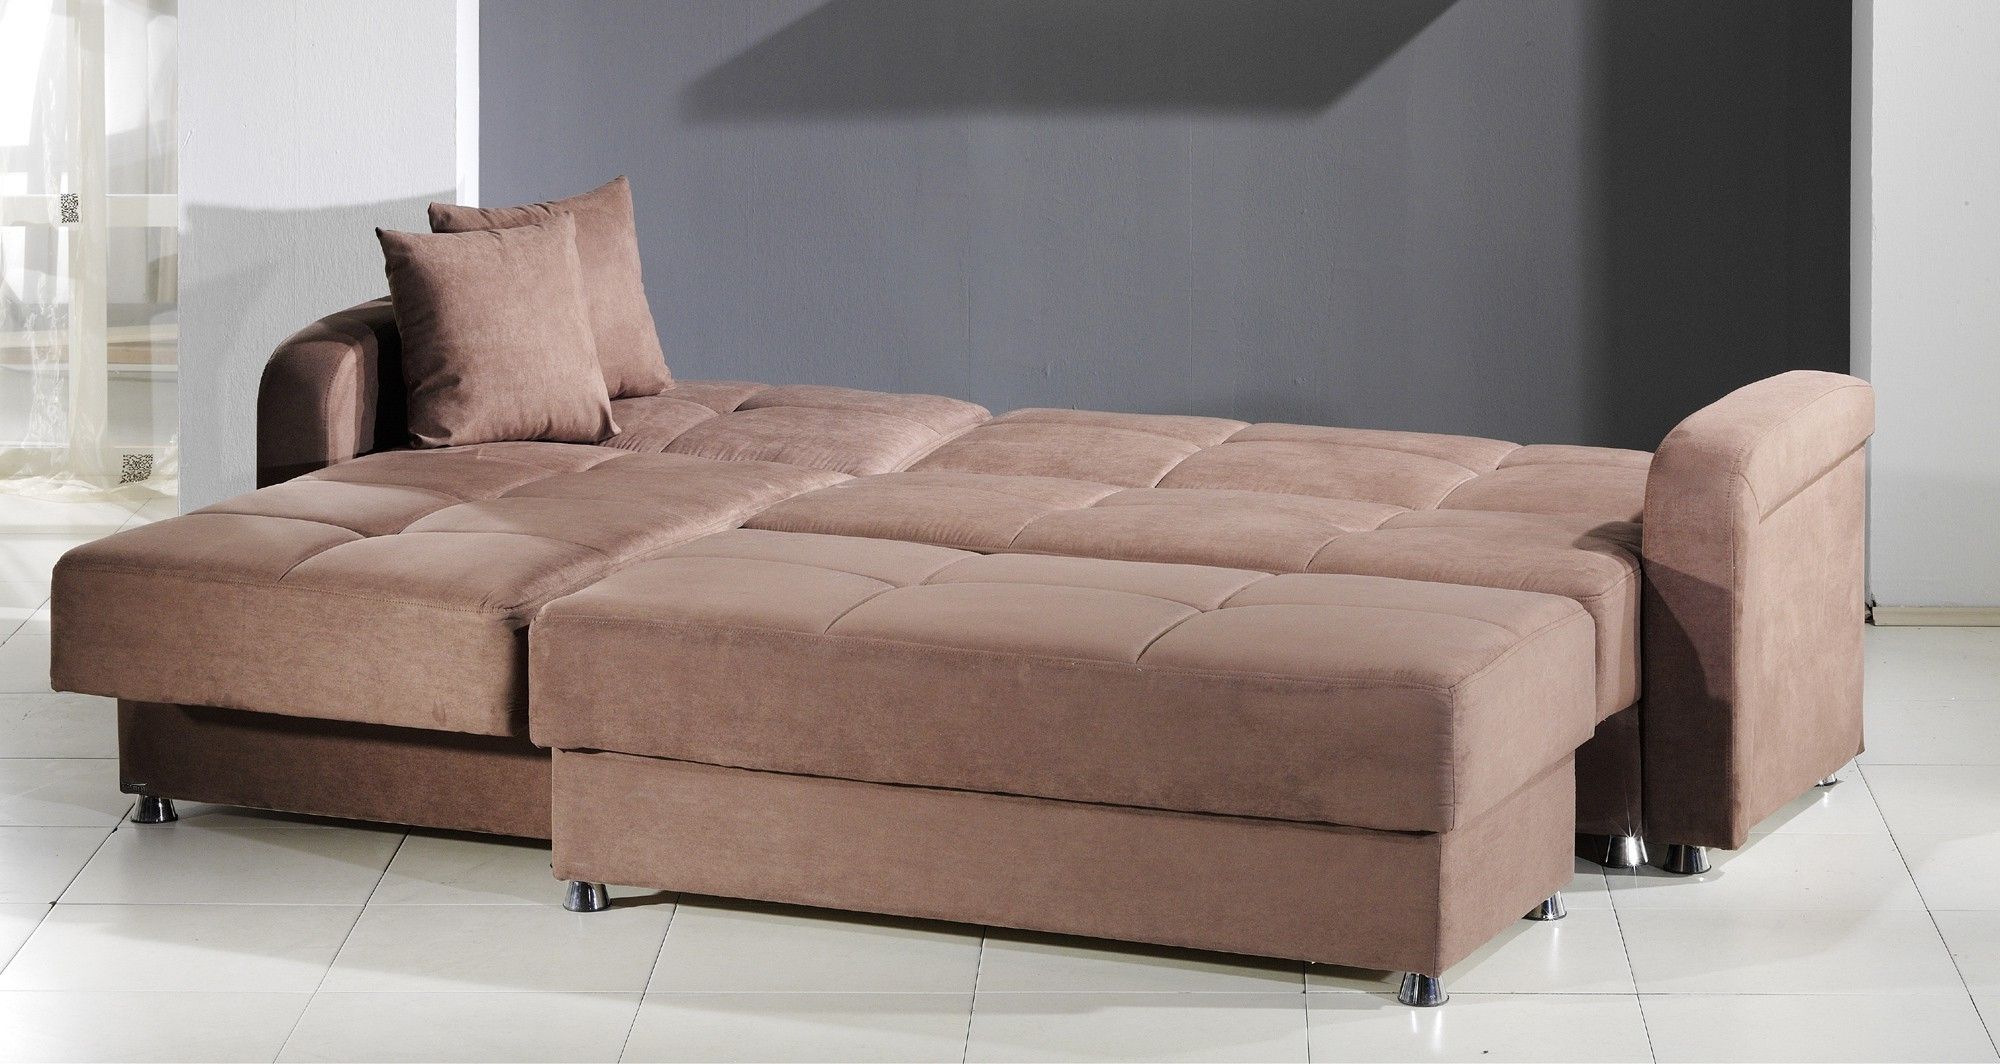 king-size sofa bed